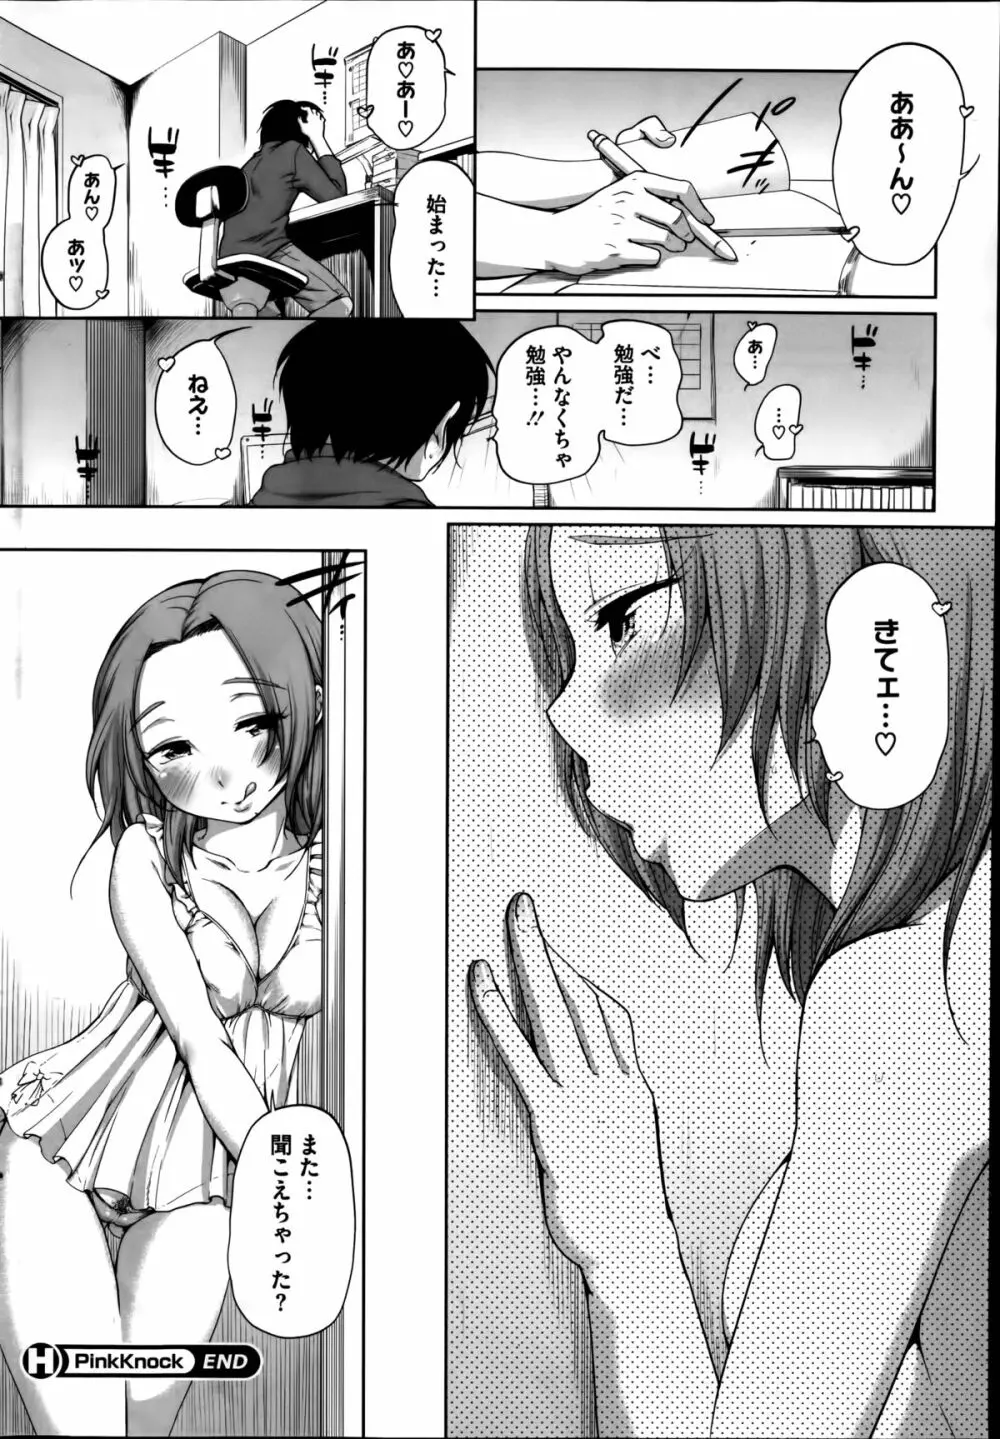 PinkKnock 第1-2章 Page.18